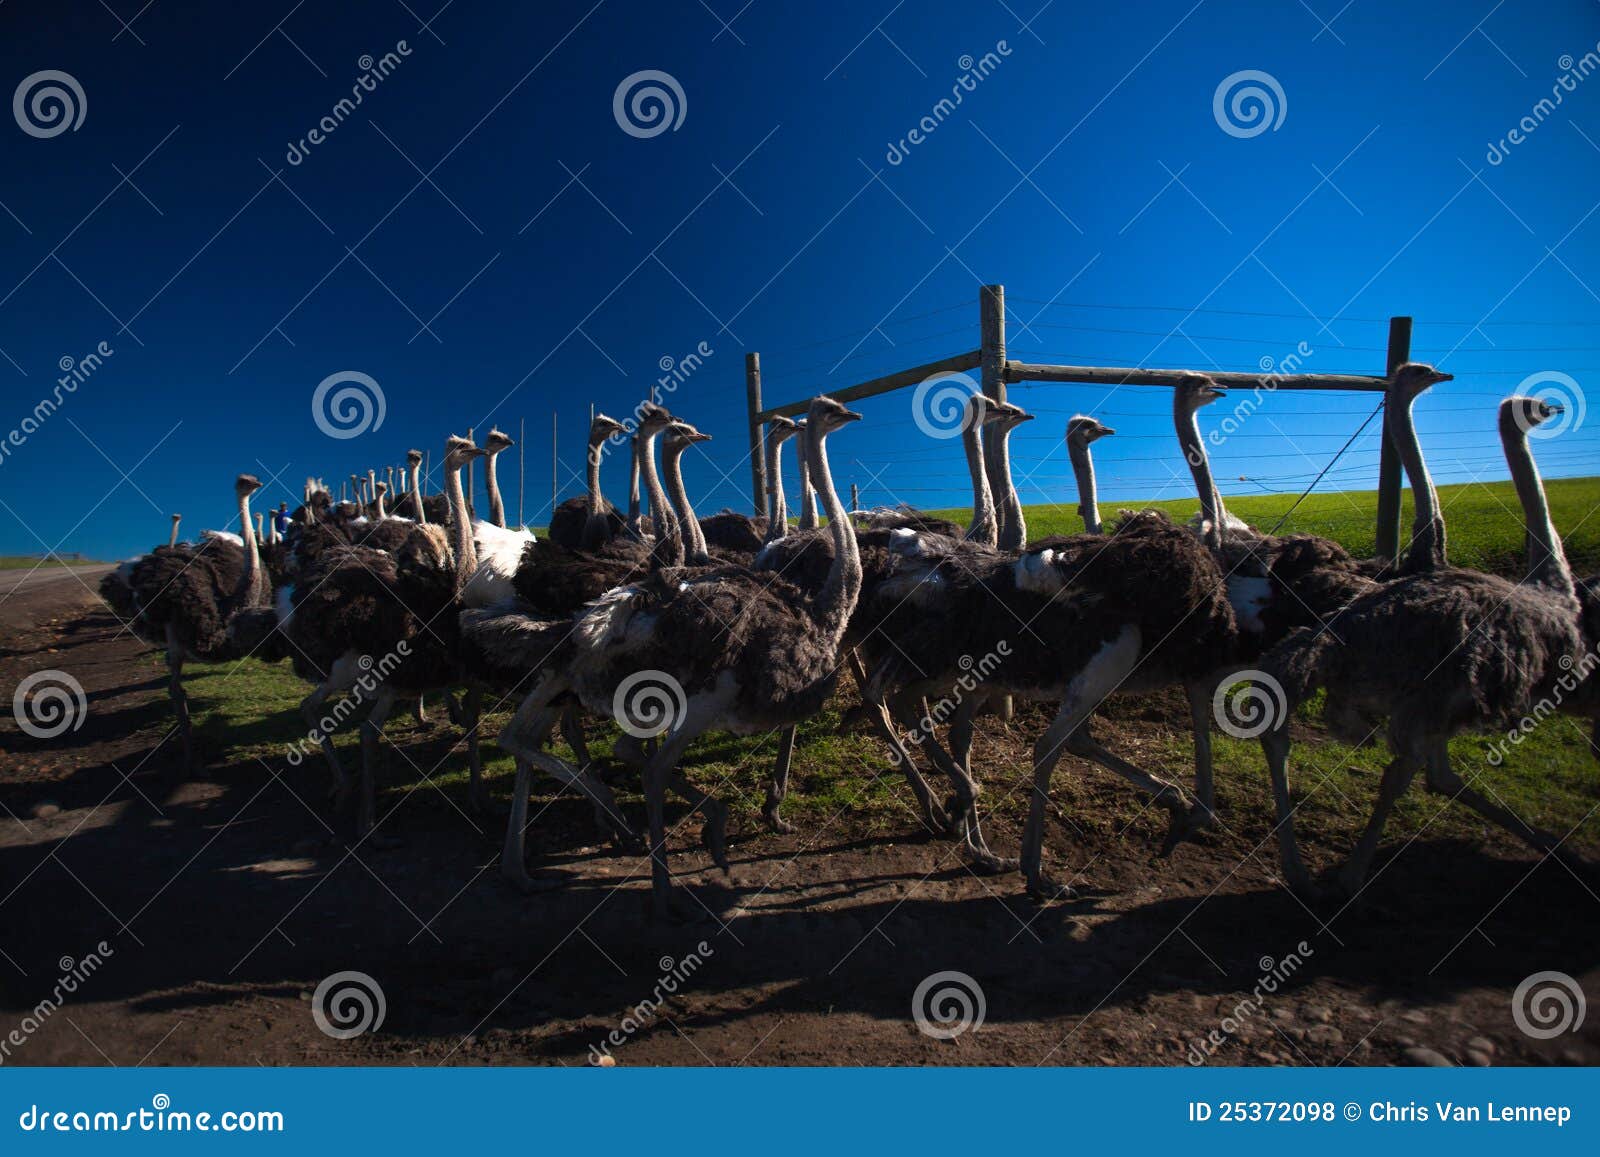 Ostrich Flock Birds. Flock of ostrich birds are herded along a dirt road in the morning on a clear blue day to a new pen.